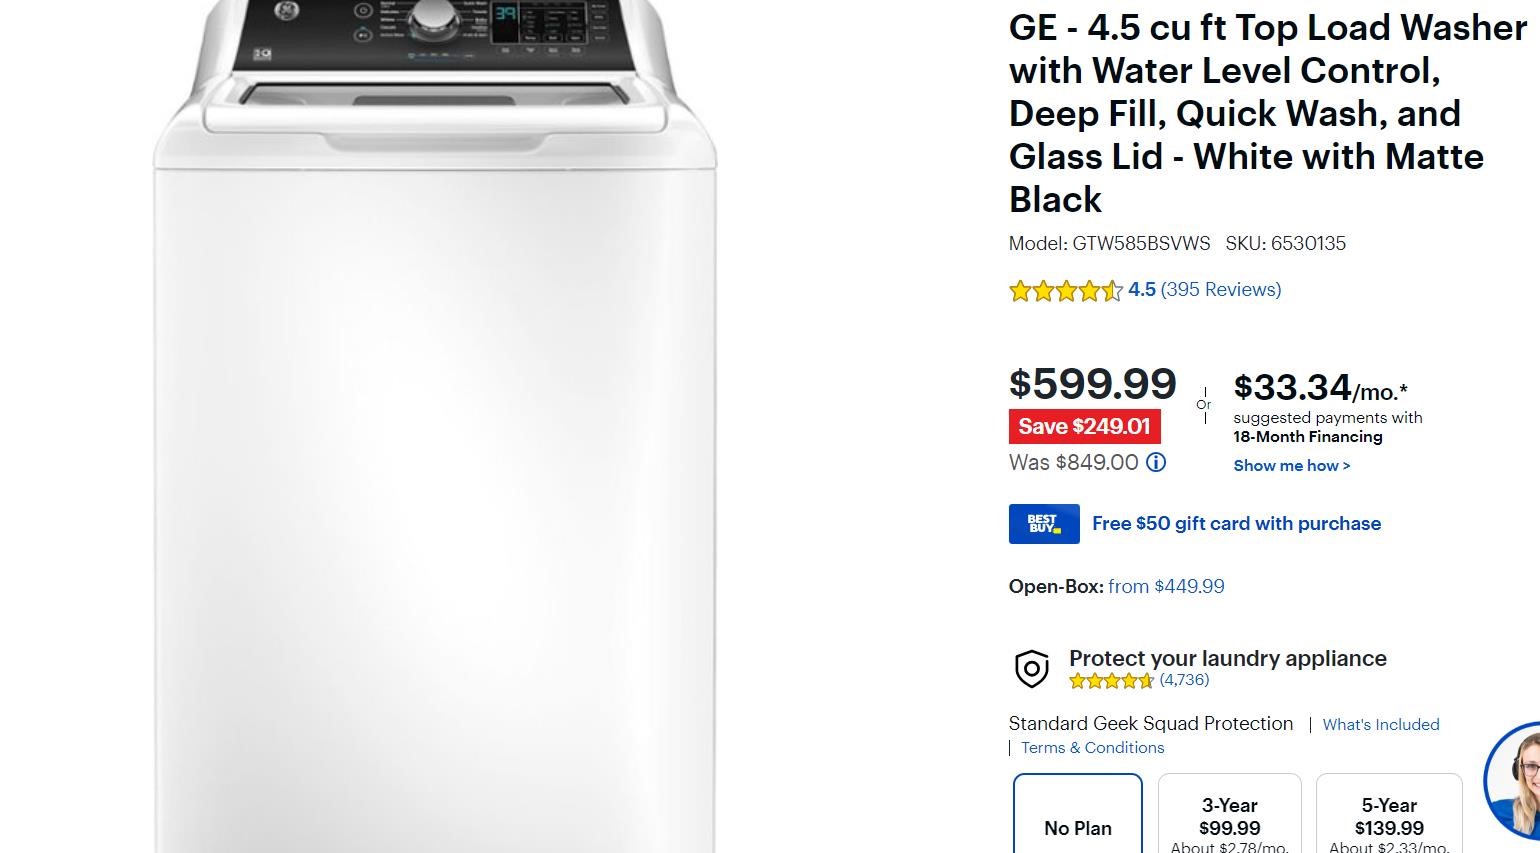 GE - 4.5 cu ft Top Load Washer